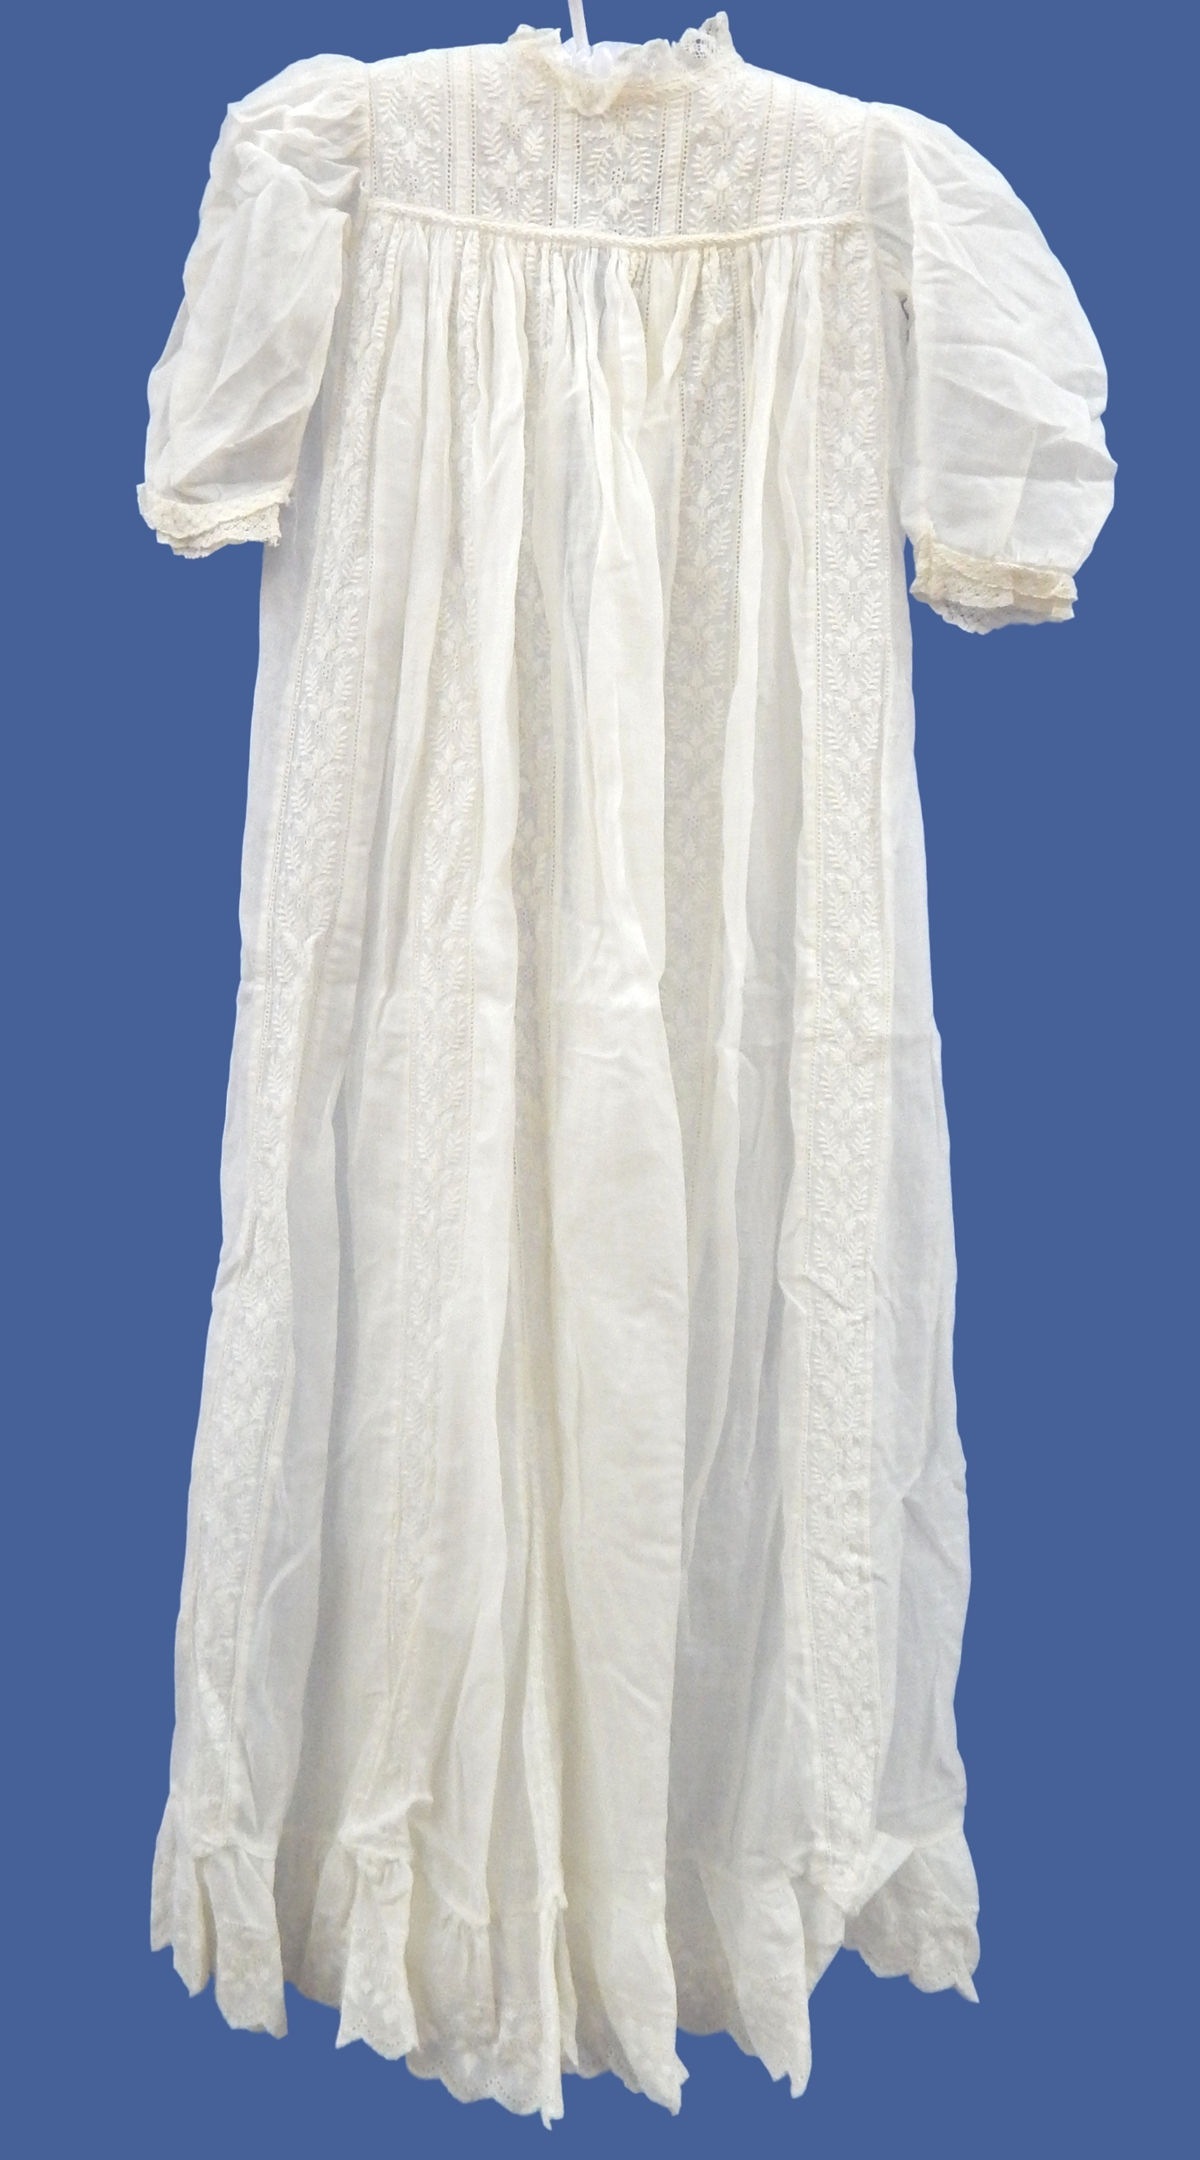 An early 20th century christening gown with lace detail,